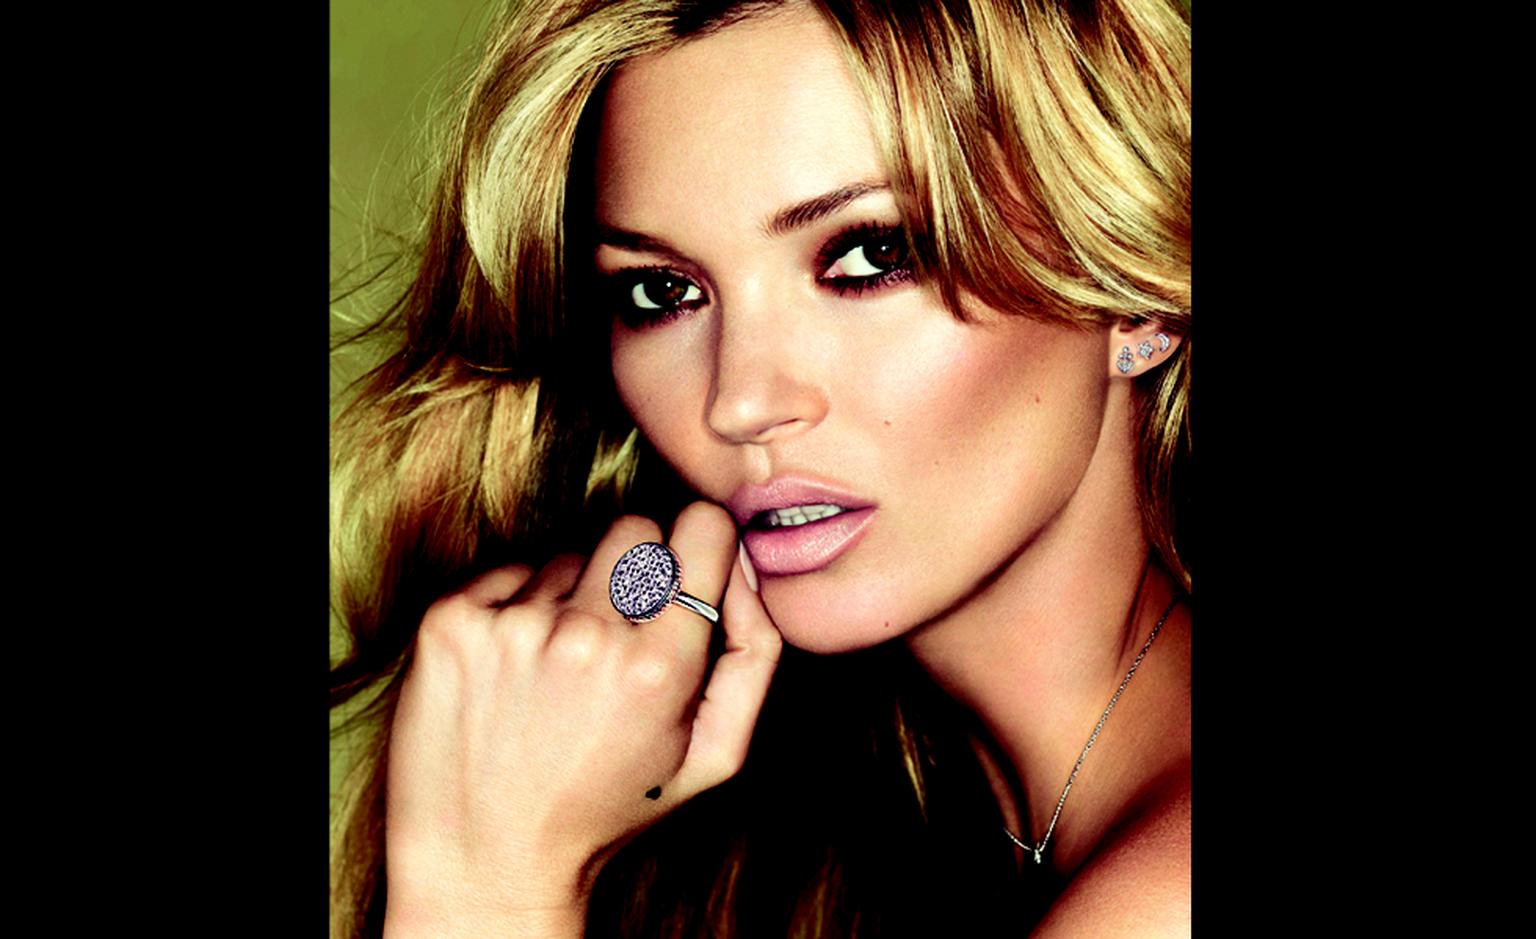 Kate Moss has designed a range of jewels for Fred inspired by her tattoos.